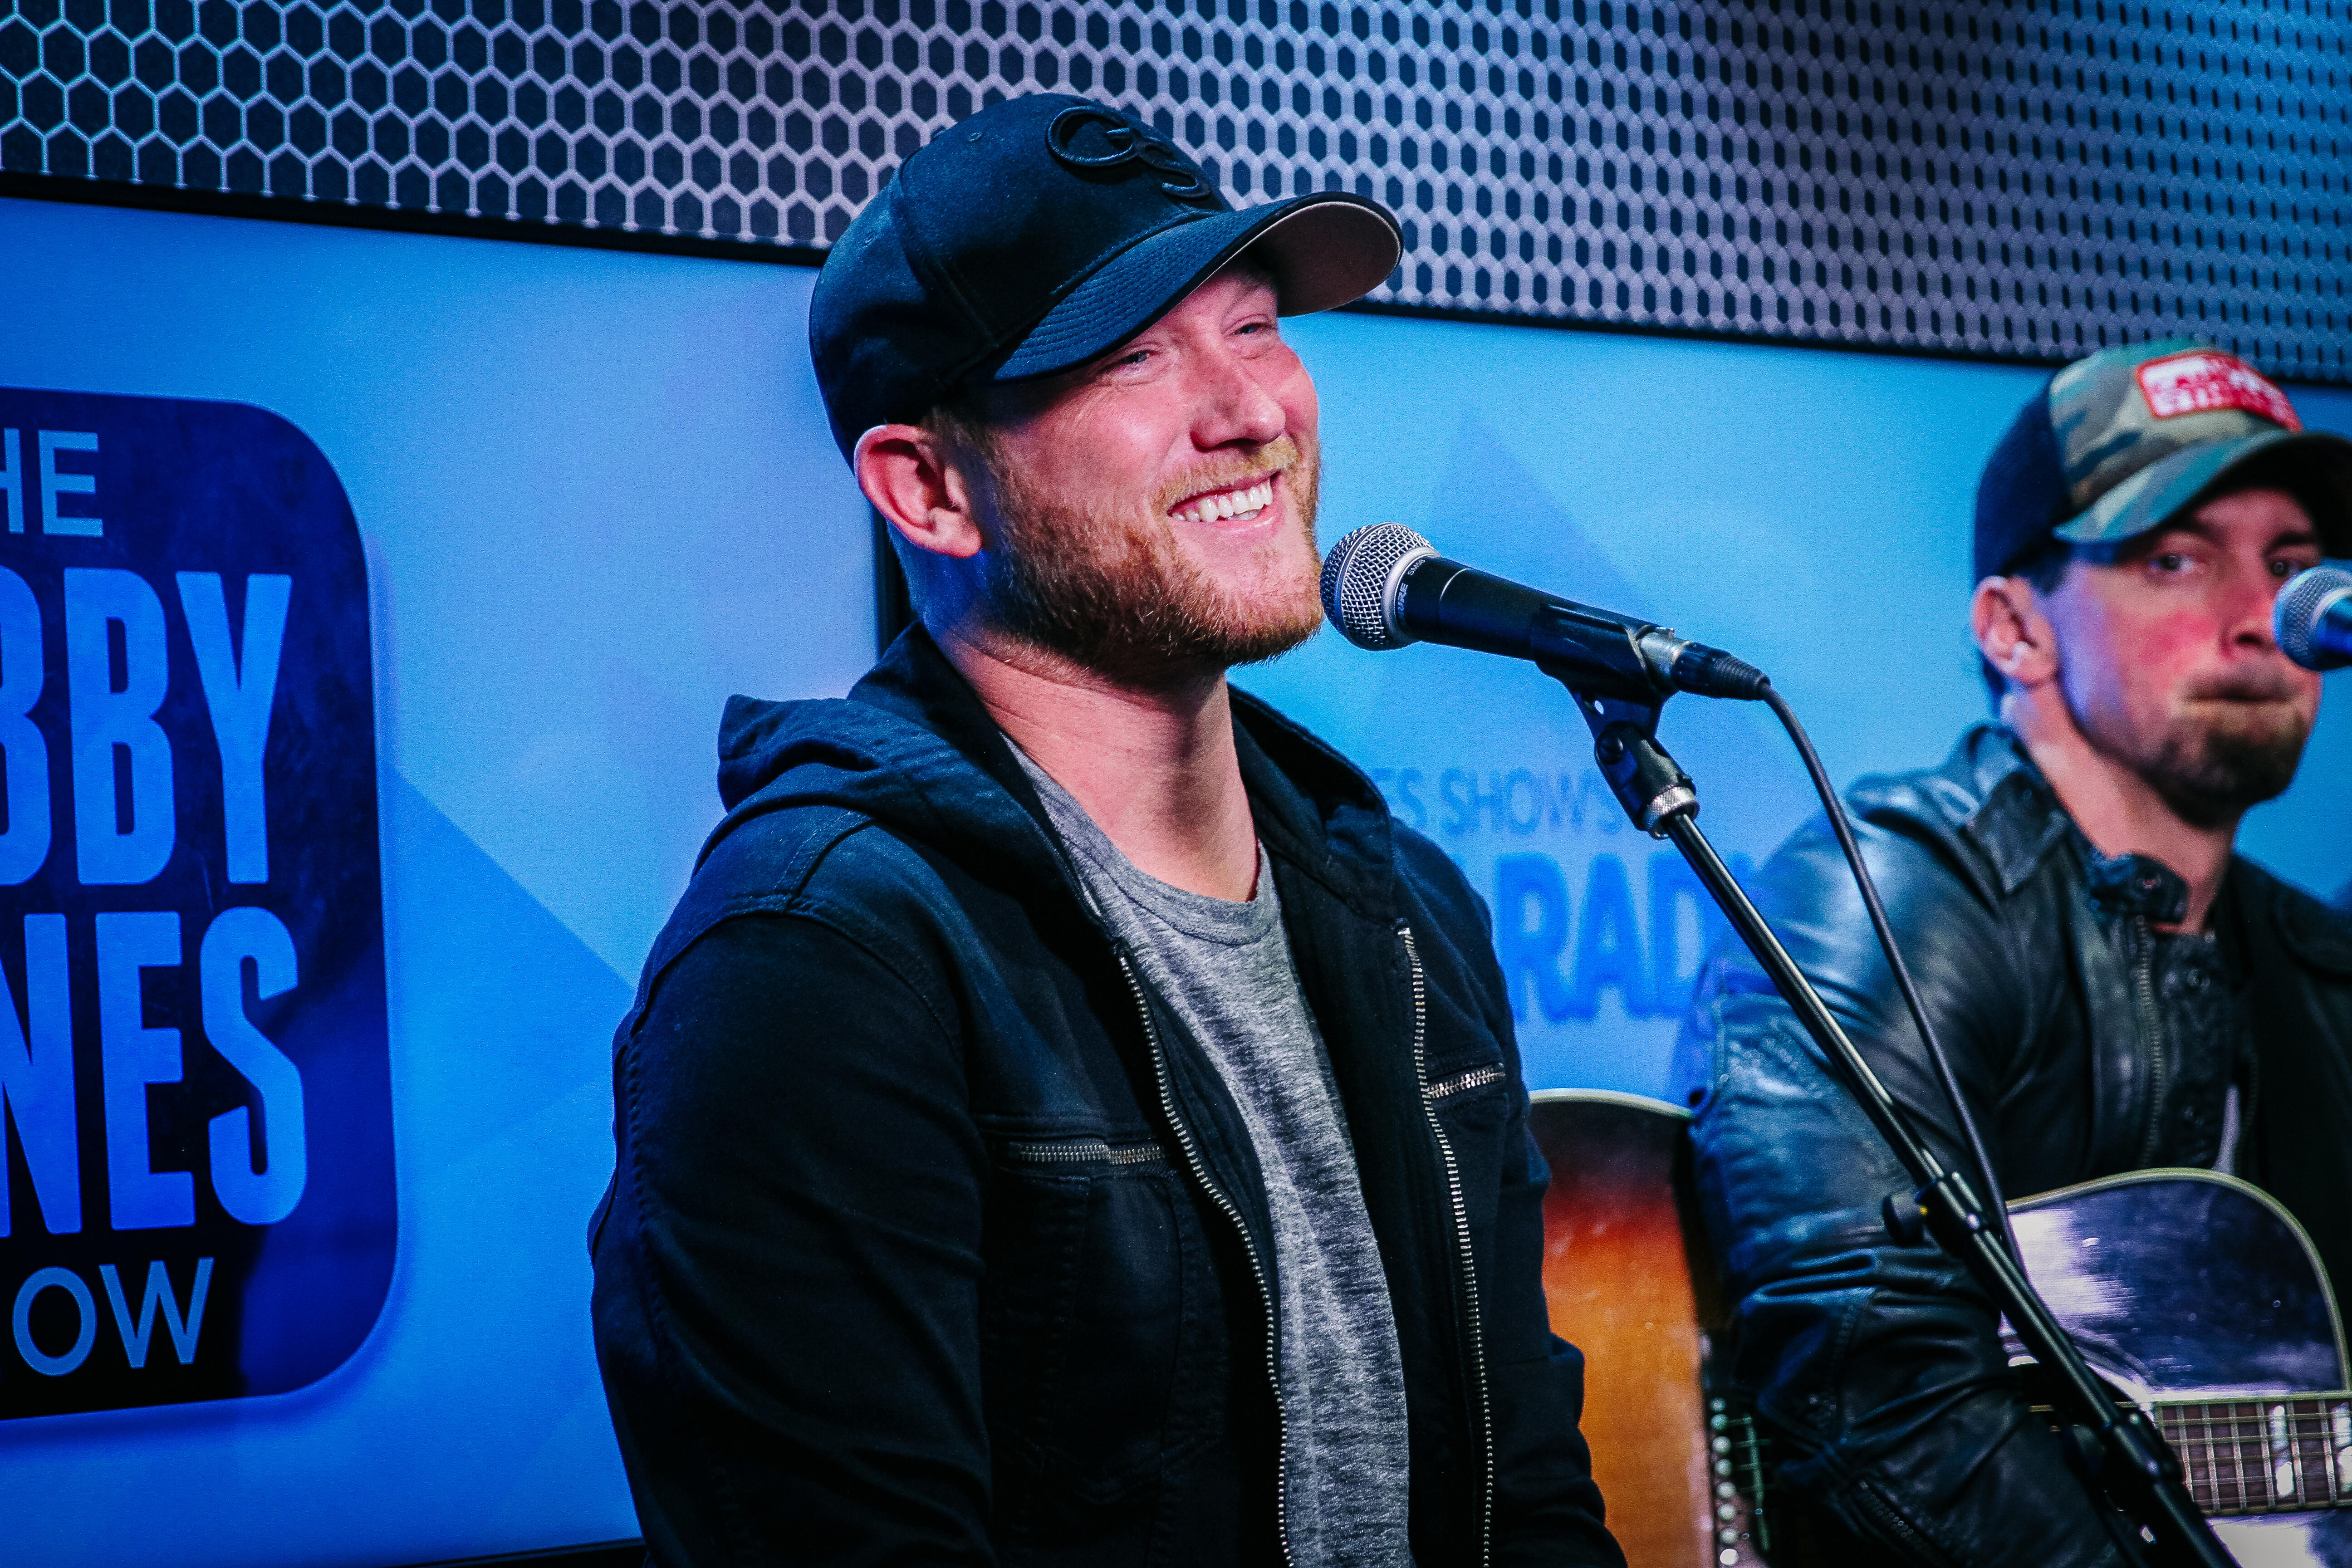 St Jude Radiothon: Cole Swindell Covers Sister Hazel "All For You" - Thumbnail Image